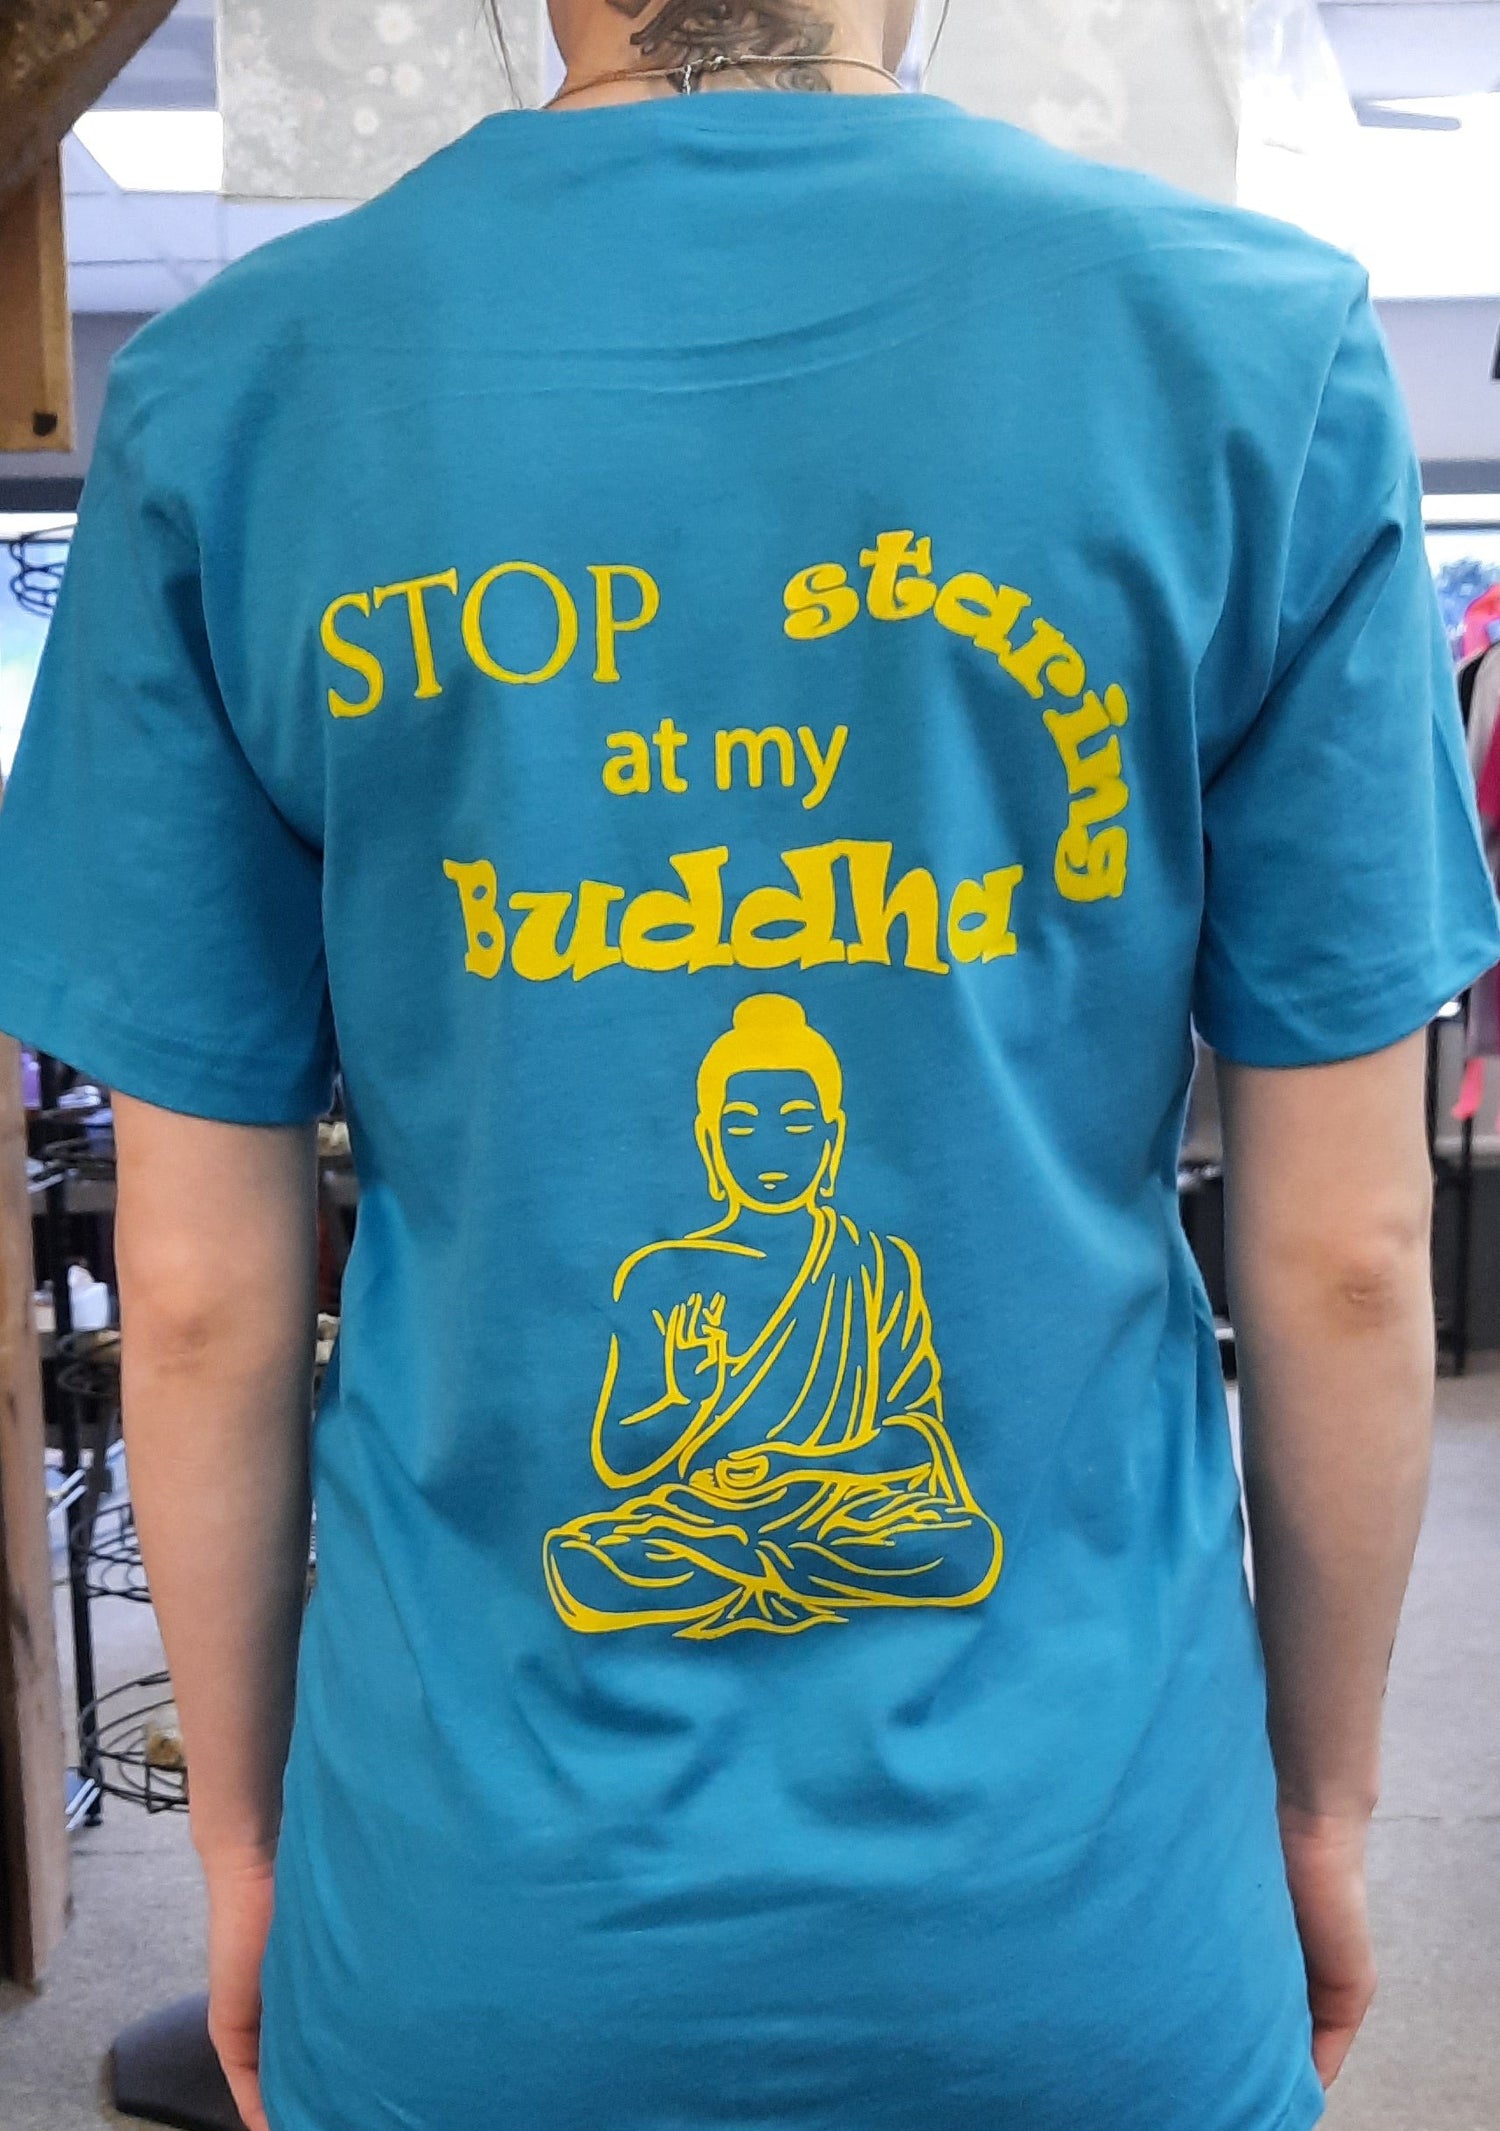 Bella Canvas short sleeve T-Shirts, size large.  "Stop staring at my Buddha" on the back, Gaia's Blessings LLC logo on front.